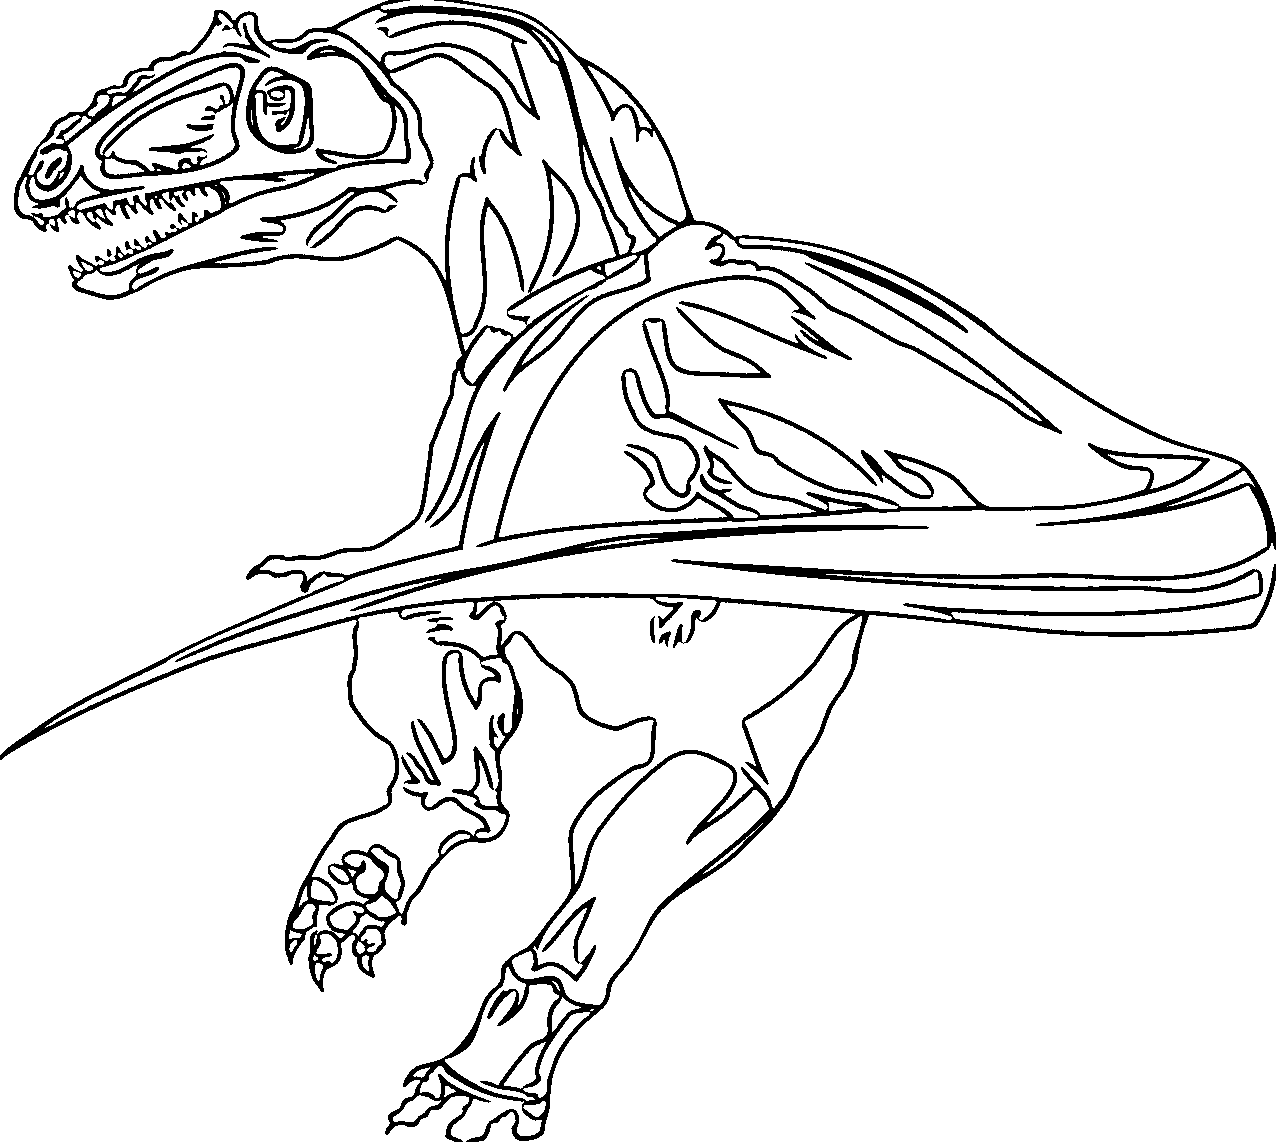 Coloring of carnivorous dinosaurs is printable